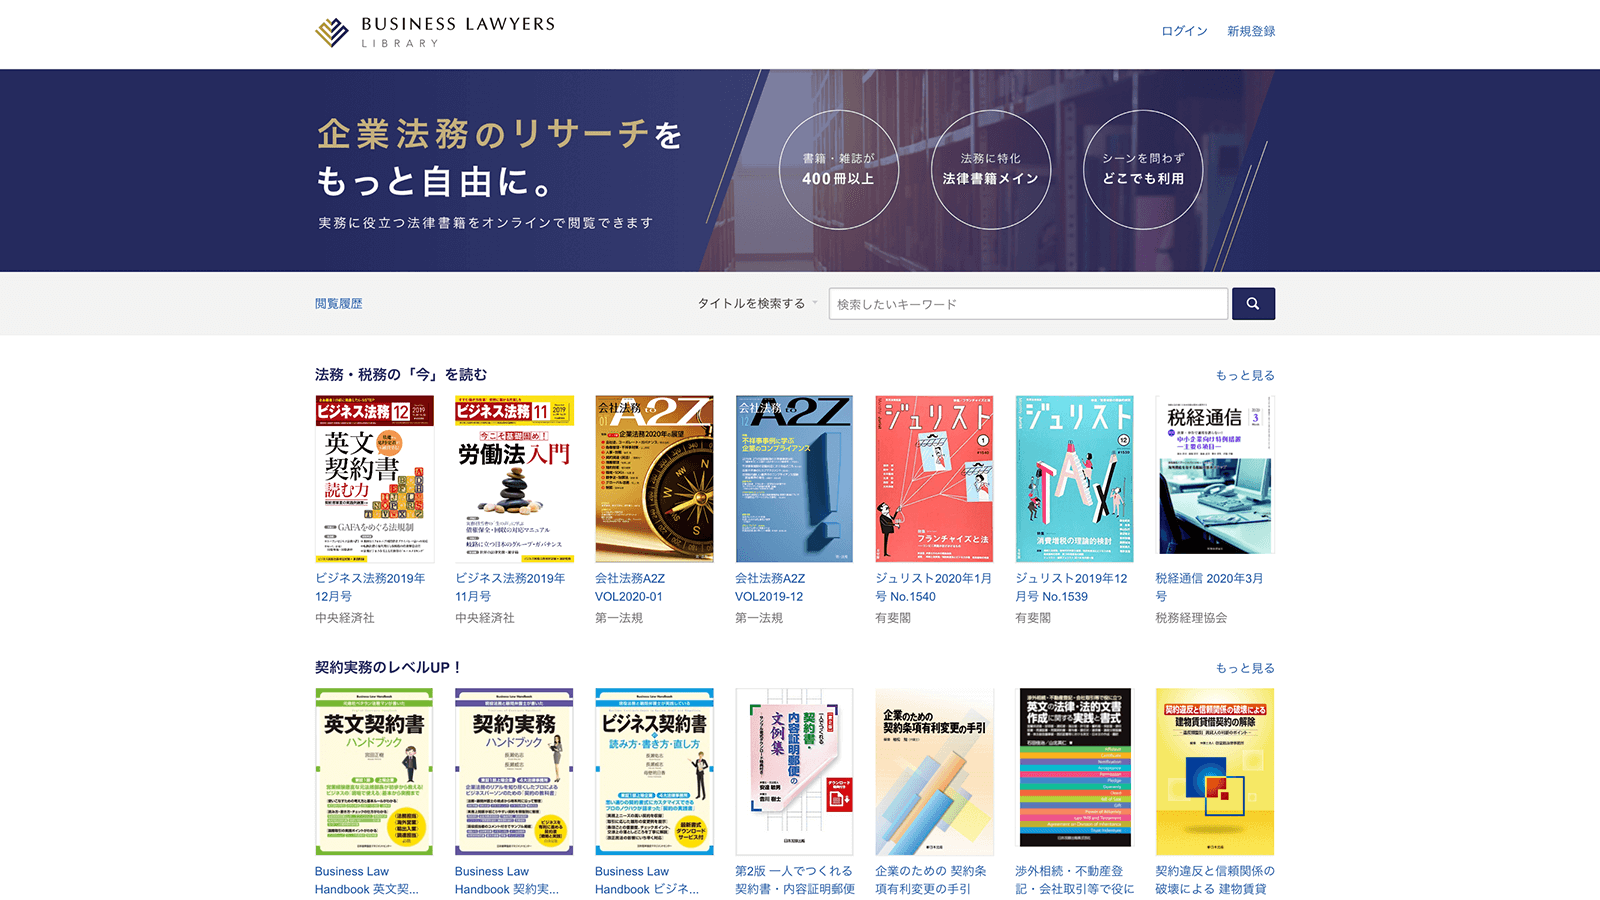 BUSINESS LAWYERS LIBRARYが待望のリリース